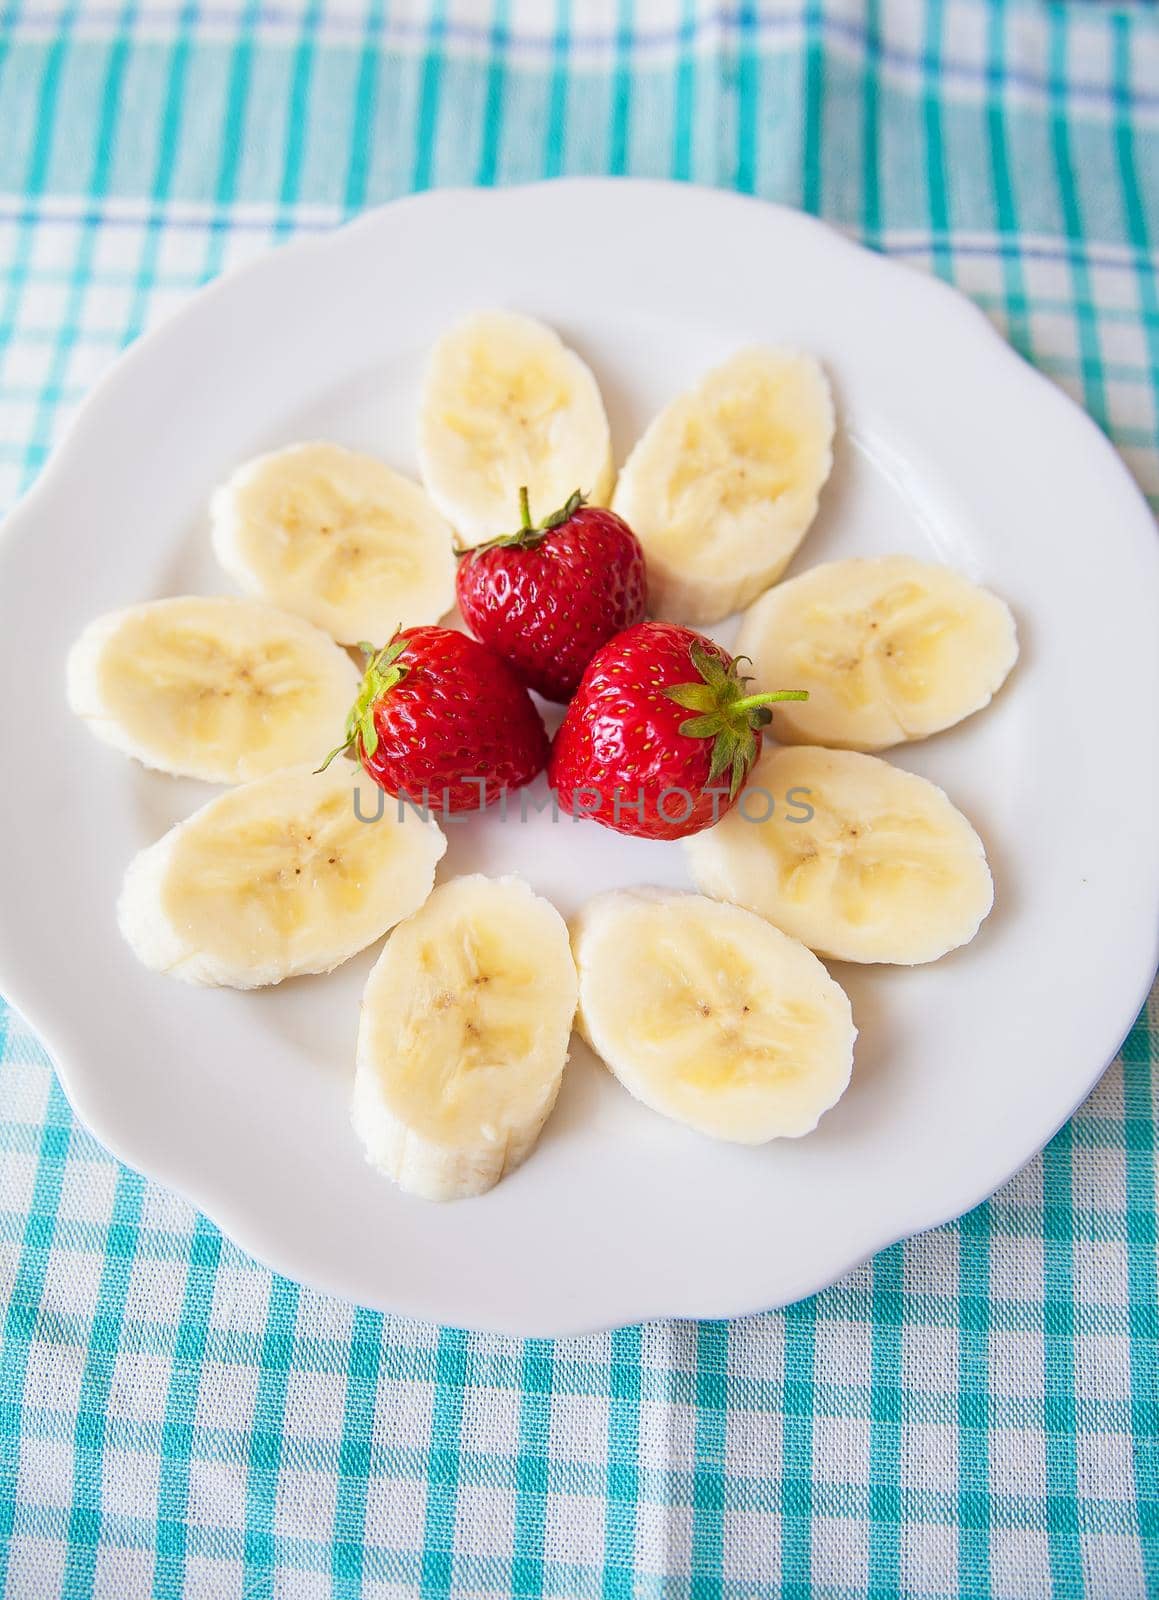 banana and strawberries on a white plate and a colorful napkin